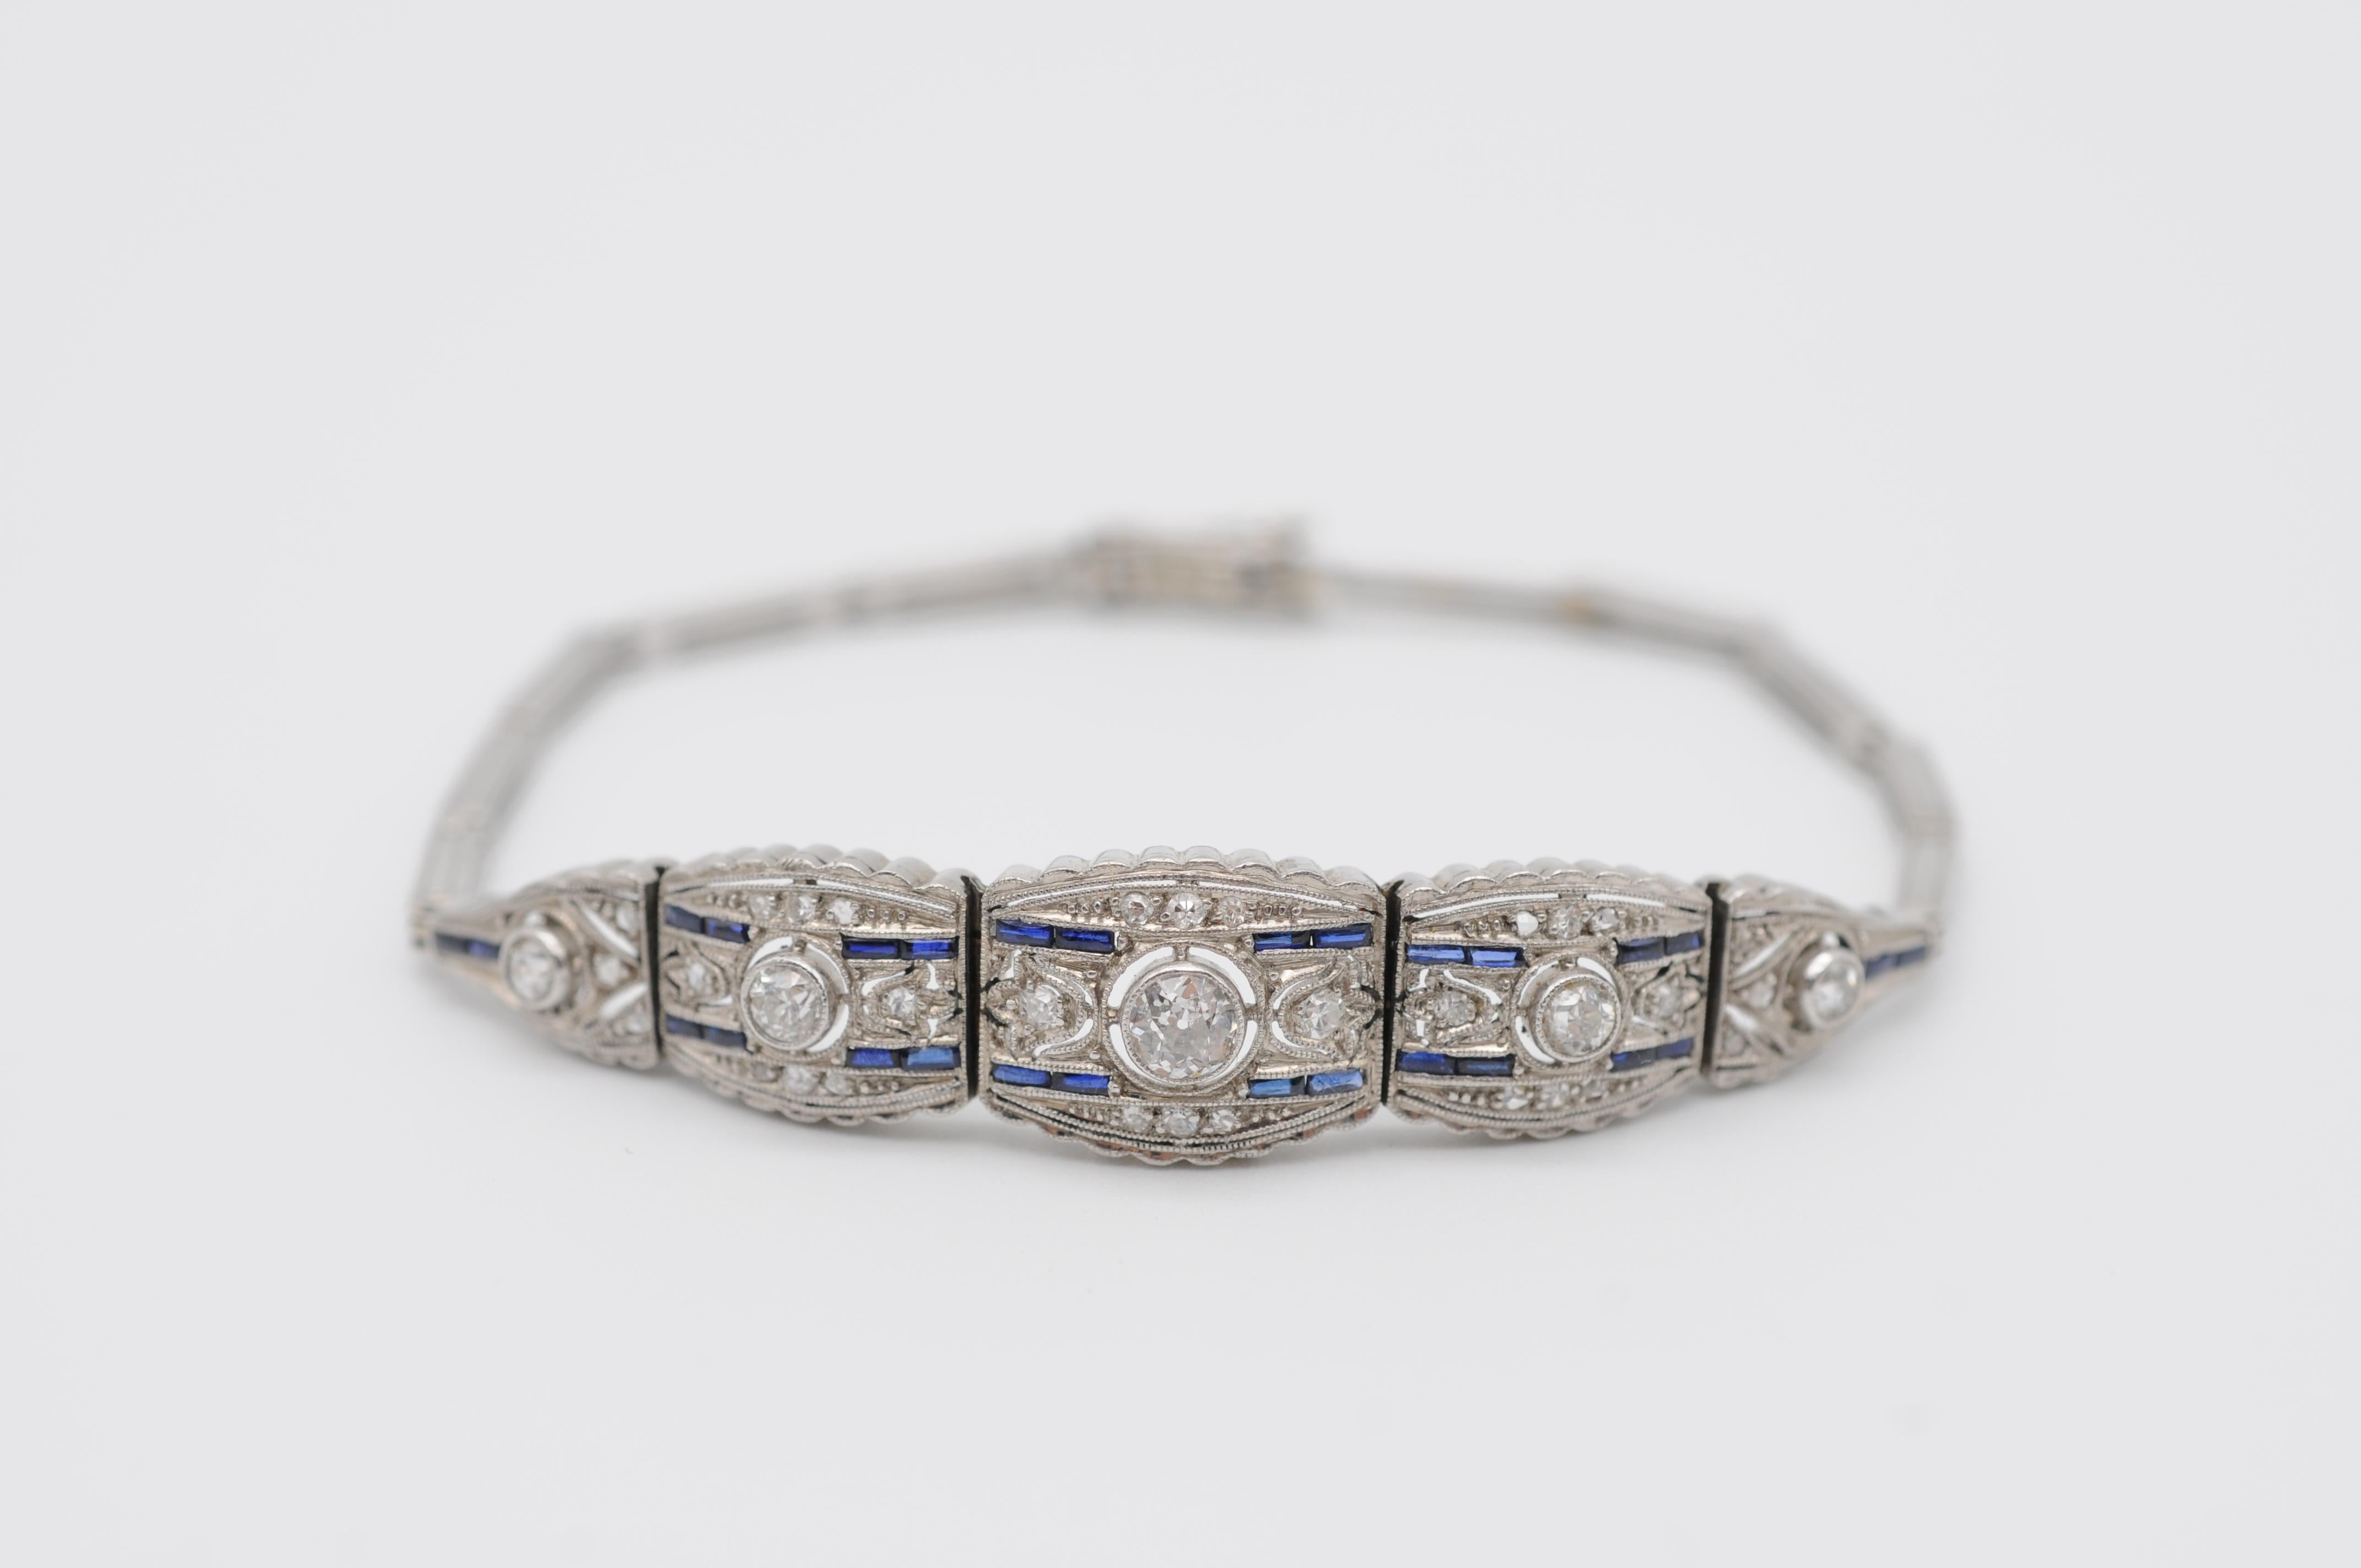 Step into the lavish world of Art Deco with this stunning bracelet, a true masterpiece of fine jewelry. The bracelet is crafted from solid 14k white gold and features a gorgeous openwork design that exudes elegance and sophistication.

The